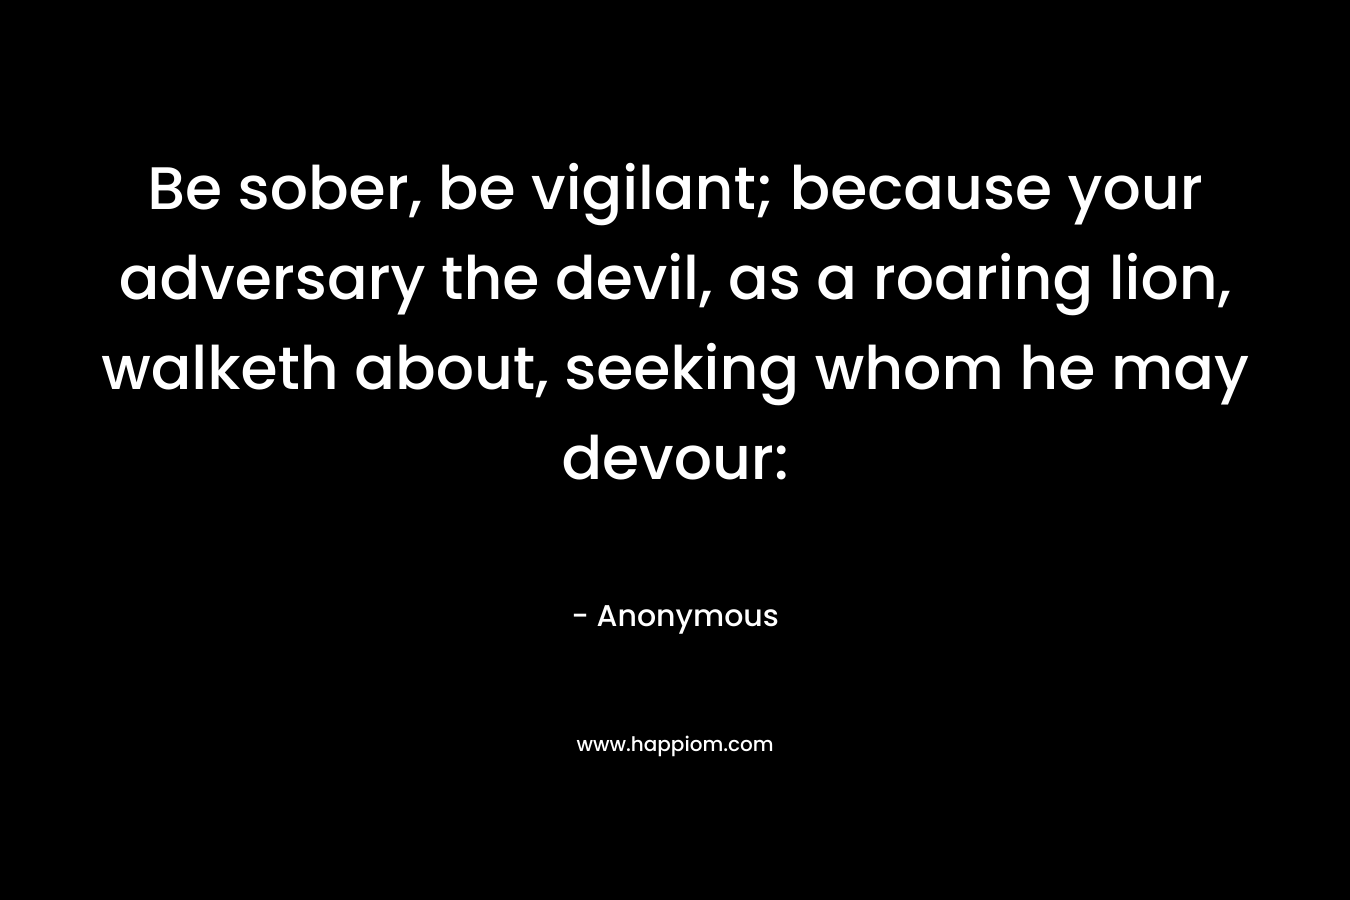 Be sober, be vigilant; because your adversary the devil, as a roaring lion, walketh about, seeking whom he may devour: – Anonymous